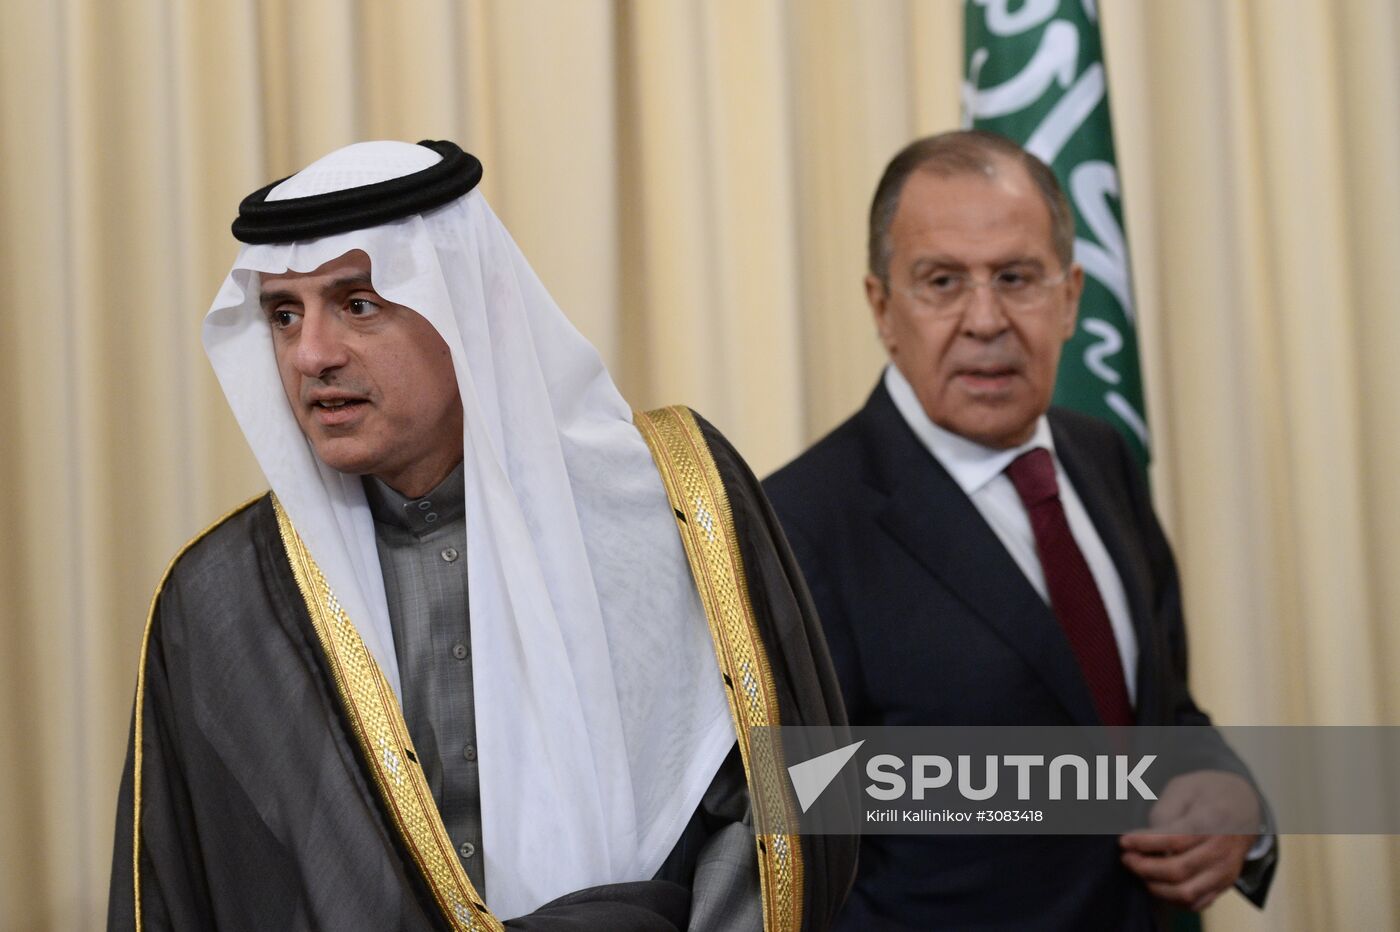 Foreign Minister Sergey Lavrov meets Saudi Foreign Minister Adel al-Jubeir